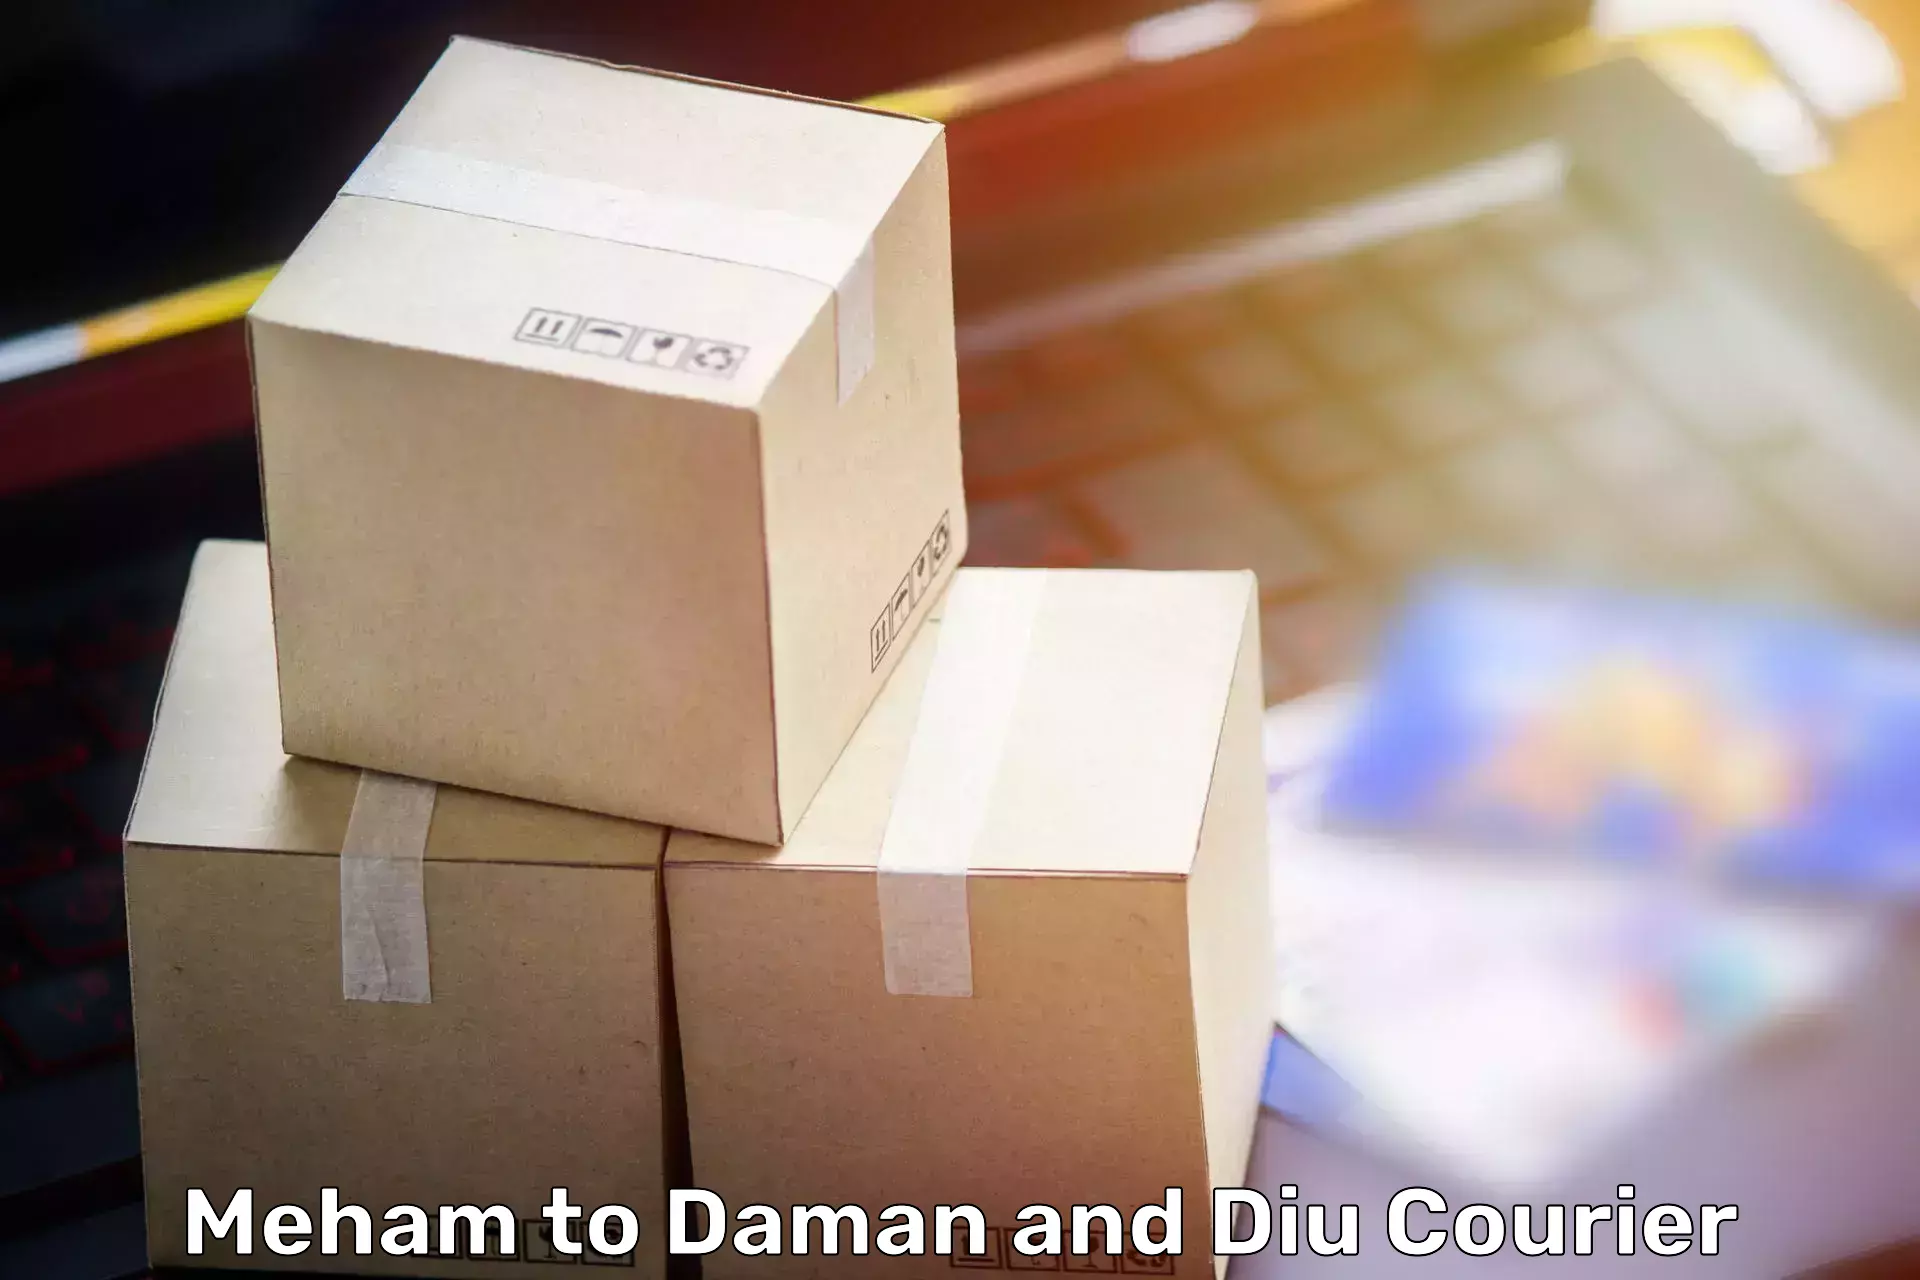 Tailored relocation services Meham to Diu